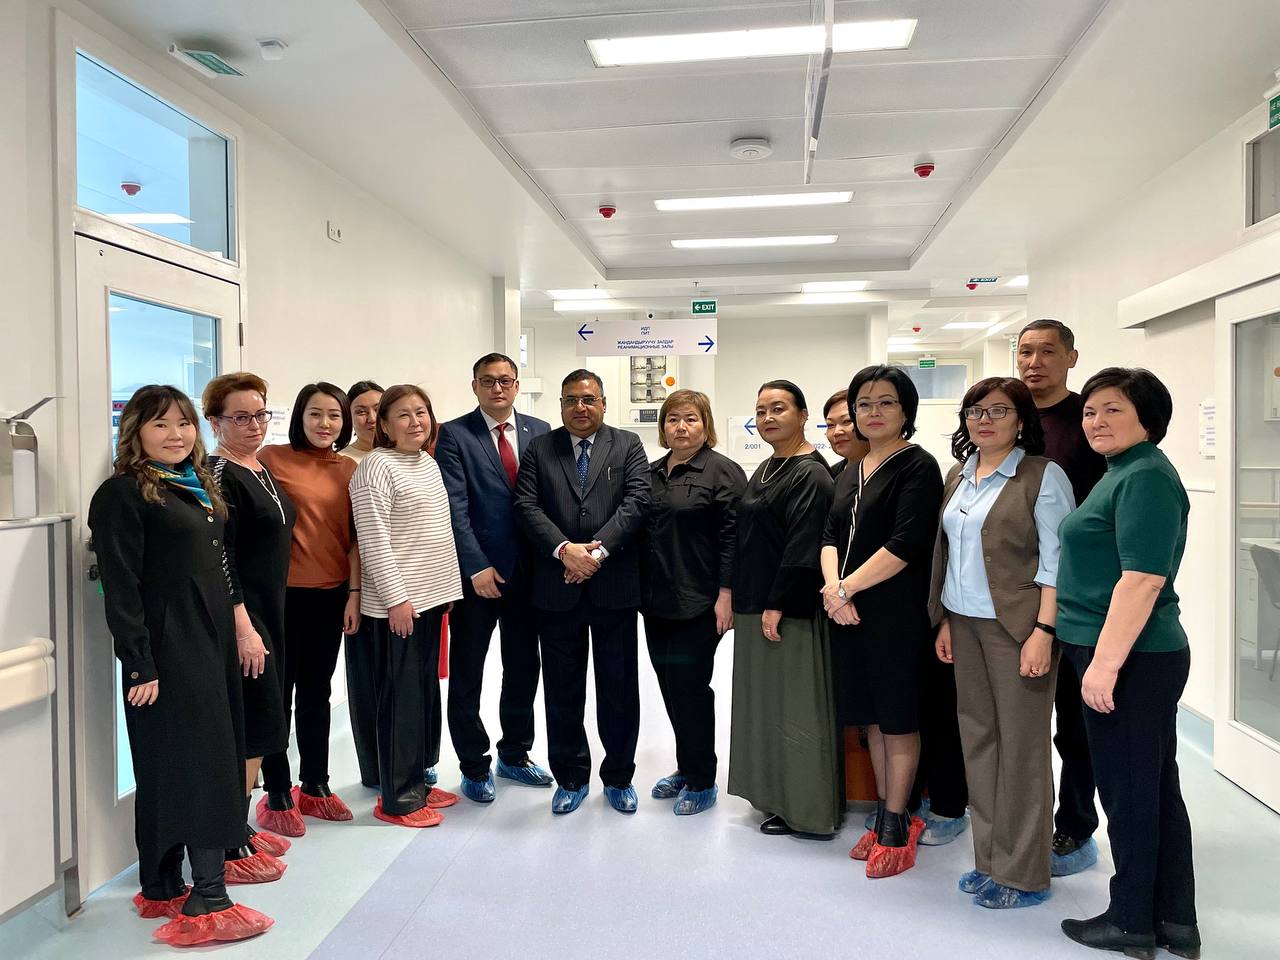 Ceremony of equipment handover to 6th maternity Hospital for “Preventable Maternal Morbidities through Access of Quality Health Services” project funded by India UN Partnership Fund in the presence of Ms. Aizhamal Shambetova Dy. Minister of Health and official of Embassy of India, Bishkek